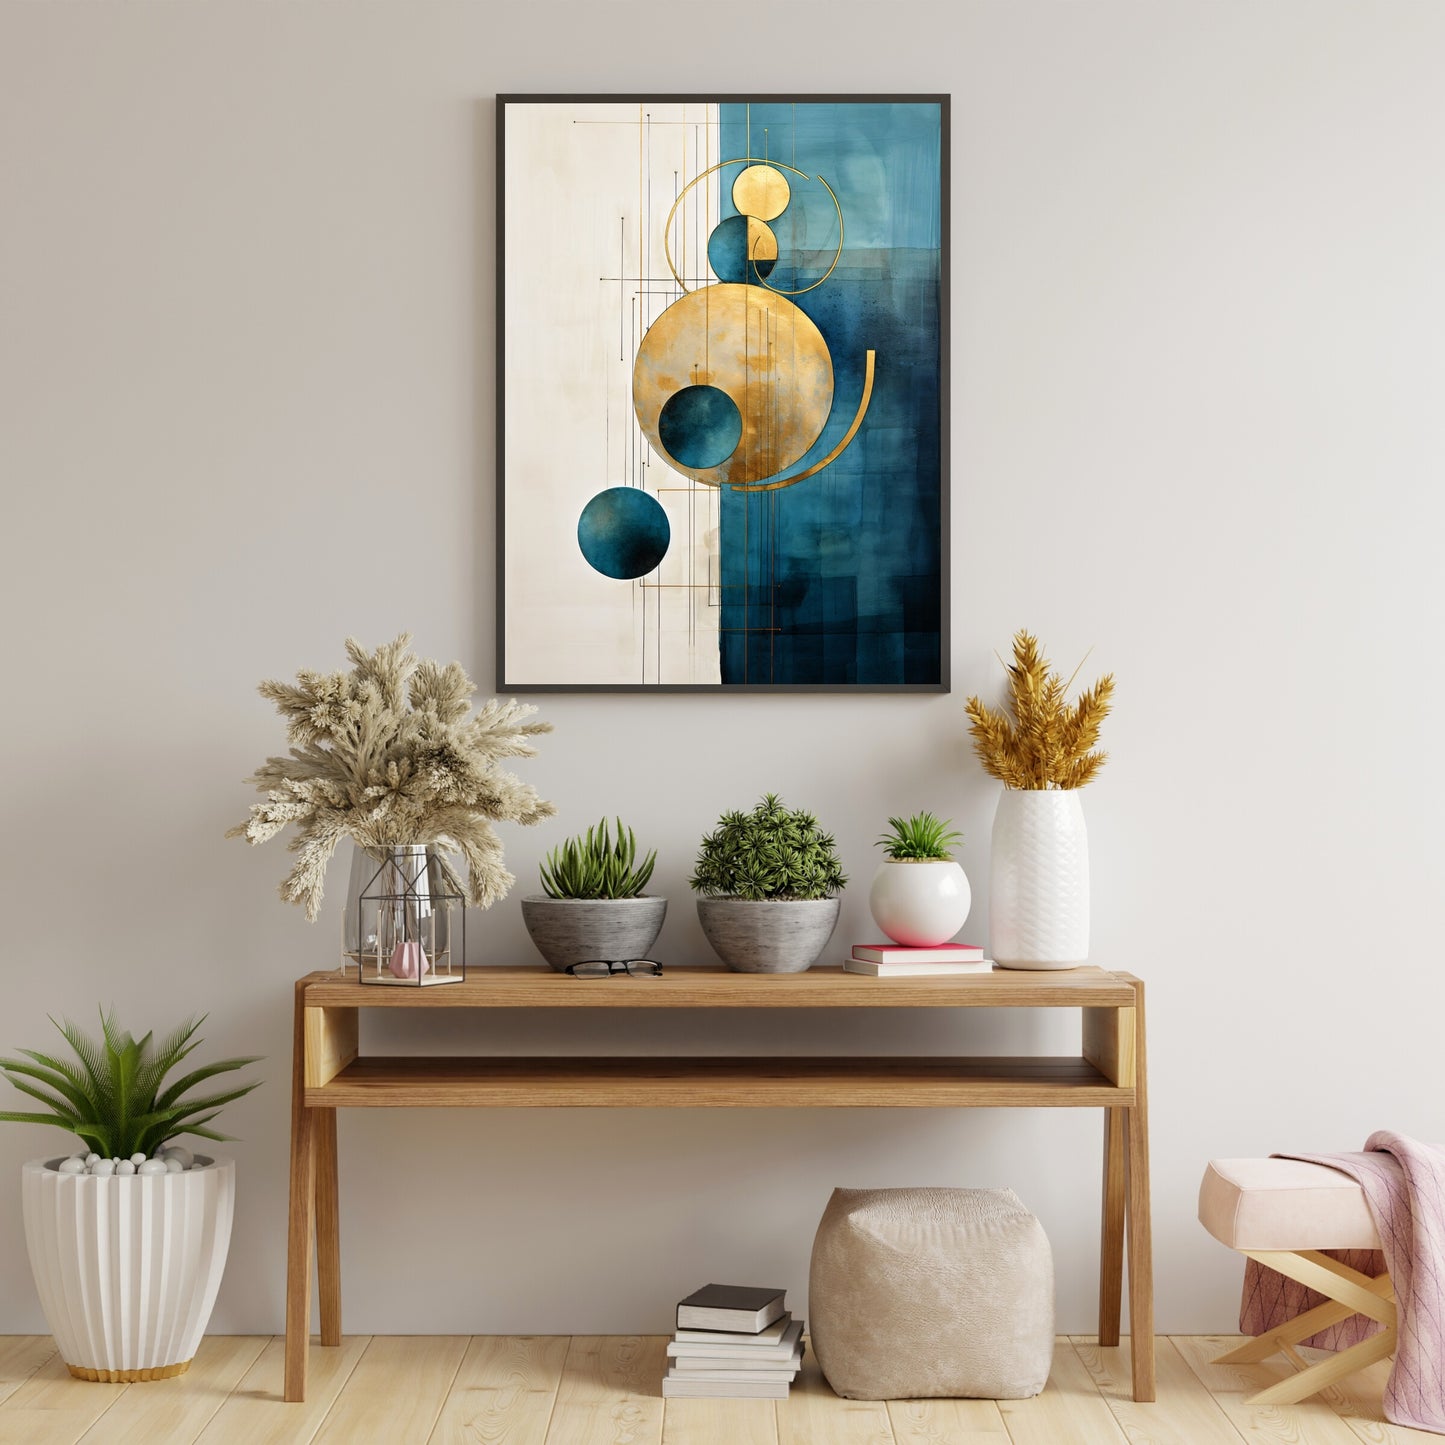 Petrol and Gold Wall Art Set of 3 Prints Abstract Petrol Design with Golden Round Shapes Living Room Decor Paper Poster Prints Minimalist Art